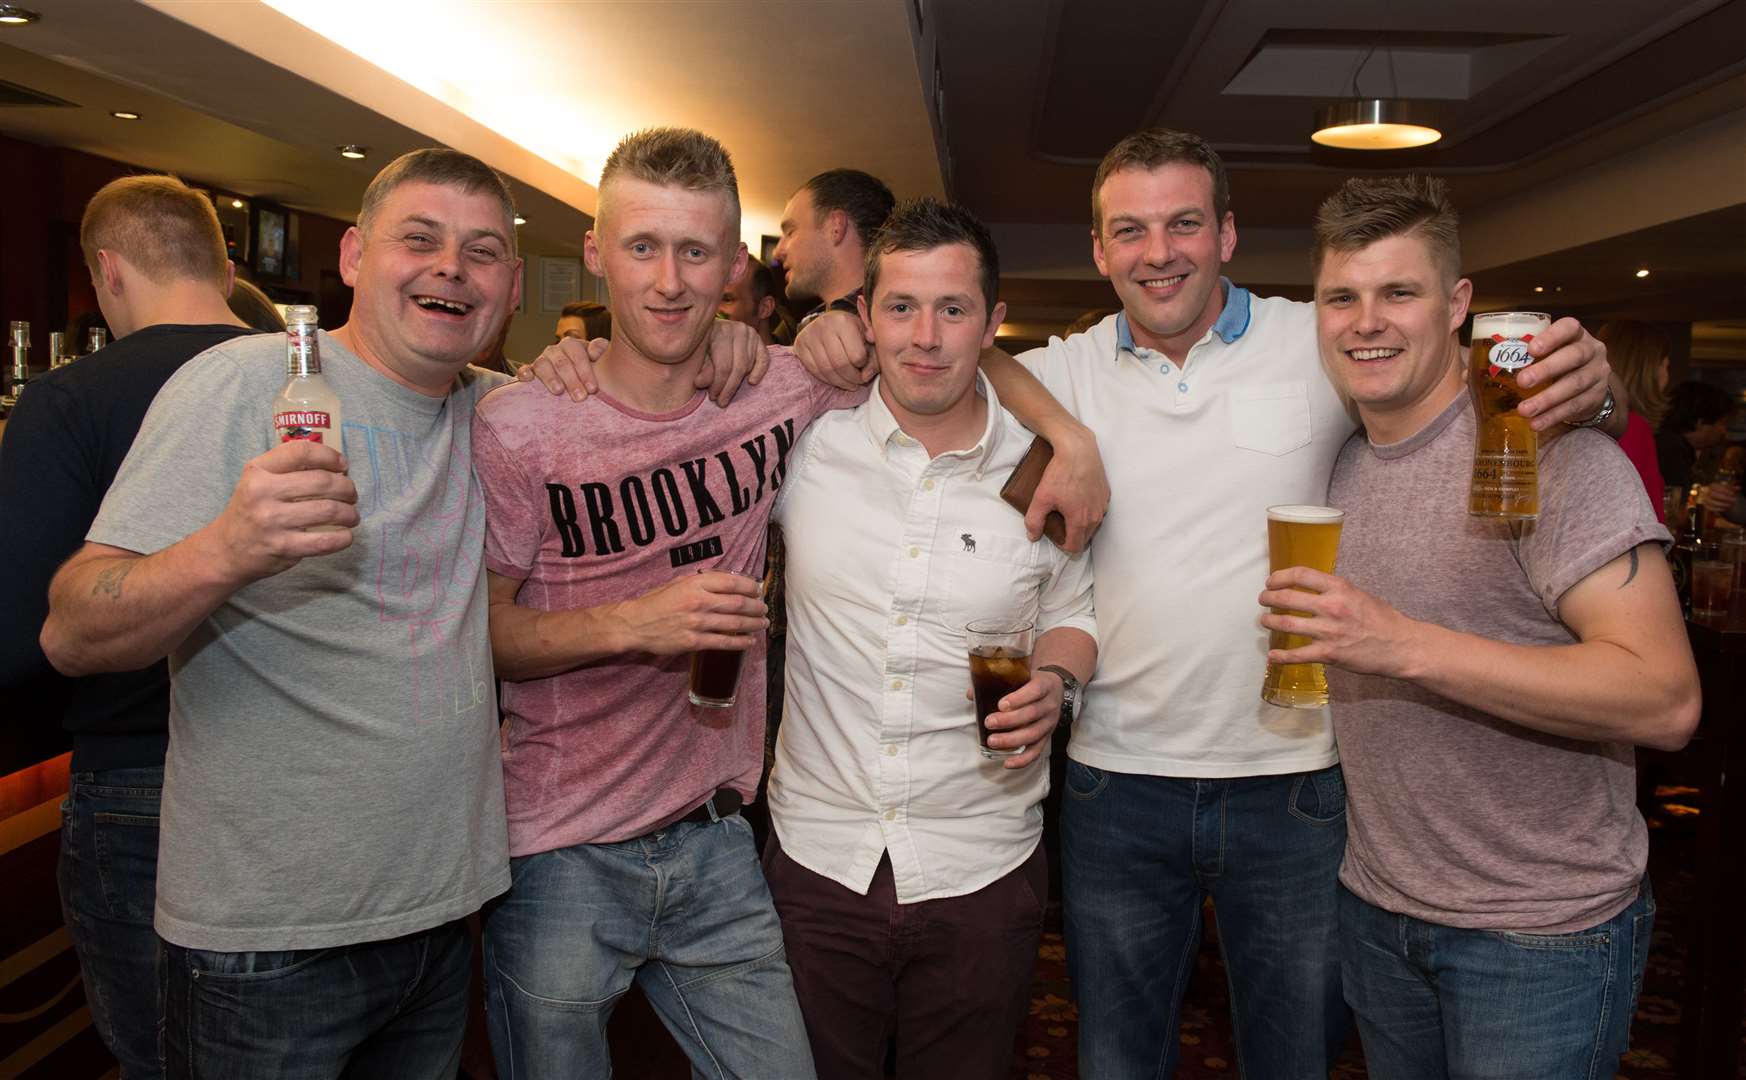 Lads night out in Wetherspoons for (left to right) Stephen Hyndman, Steven Foulton, Mark Ervine, Sean Fanmall and Johnny O'Neil.